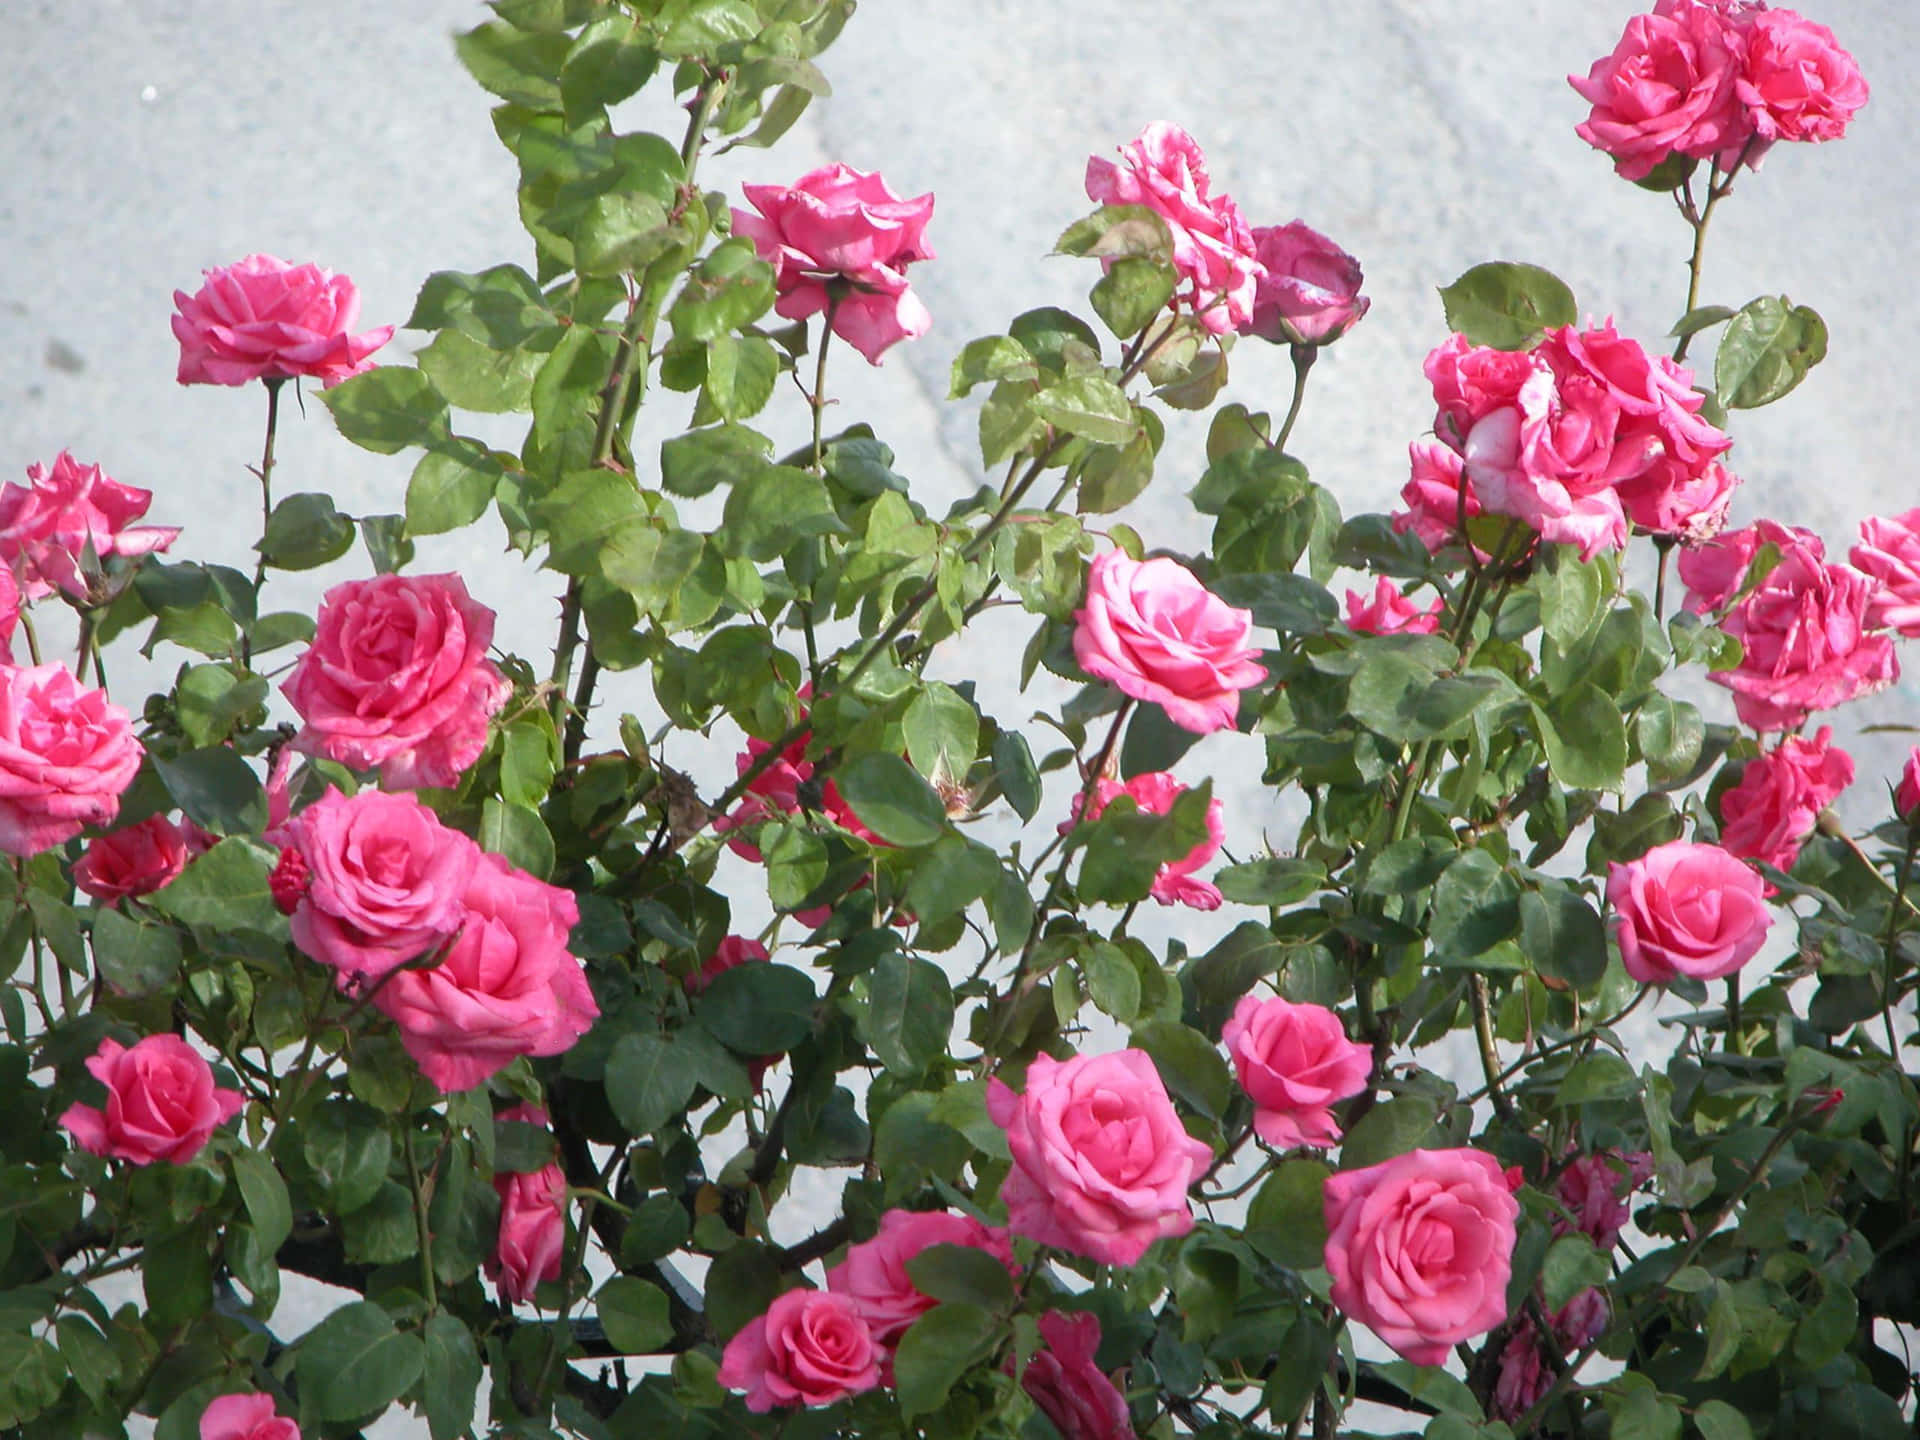 Garden Roses Pink Flowers And Green Leaves Picture